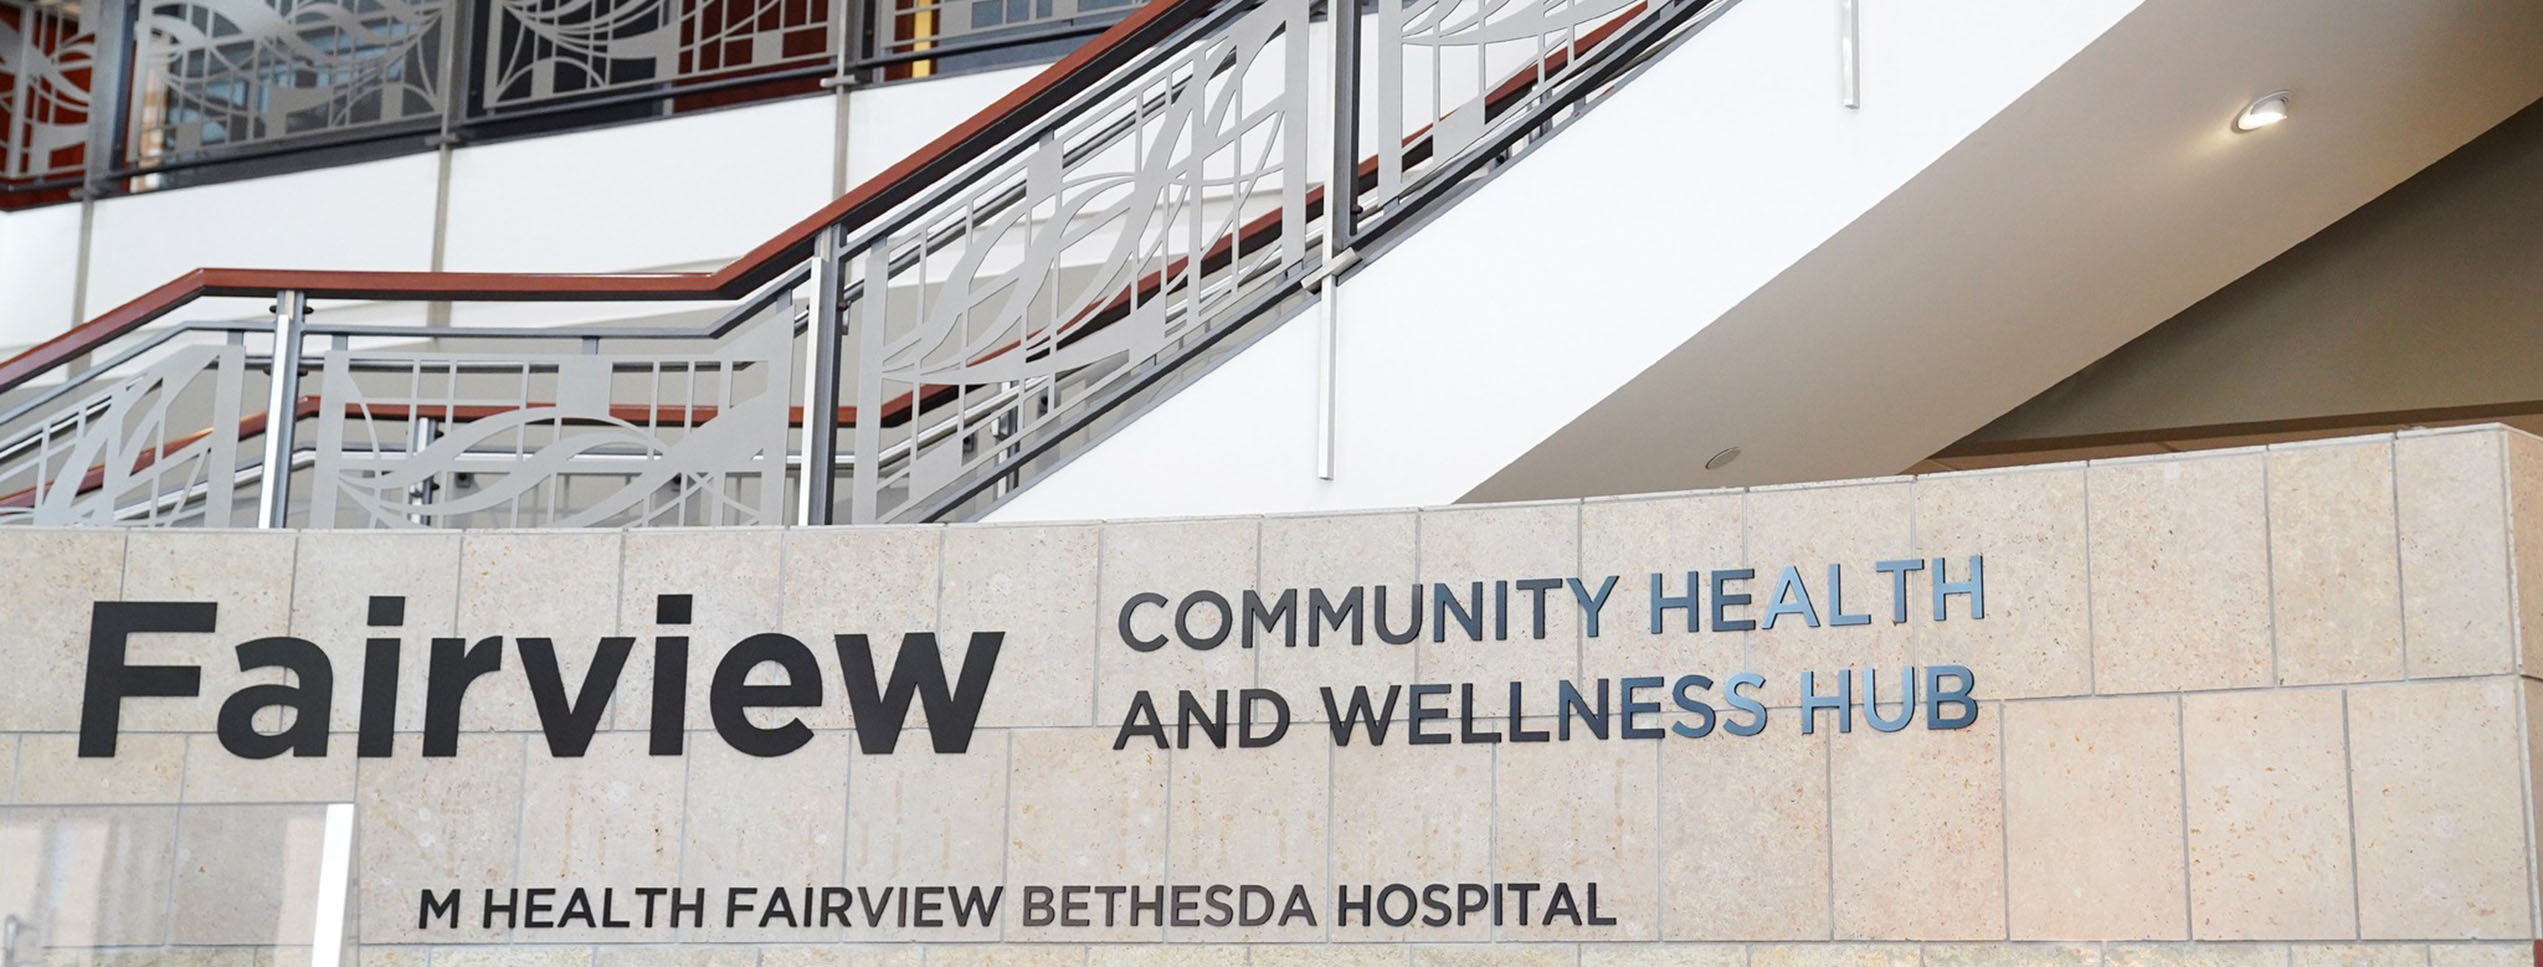 picture of stairway with sign in front that says Fairview community health and wellness